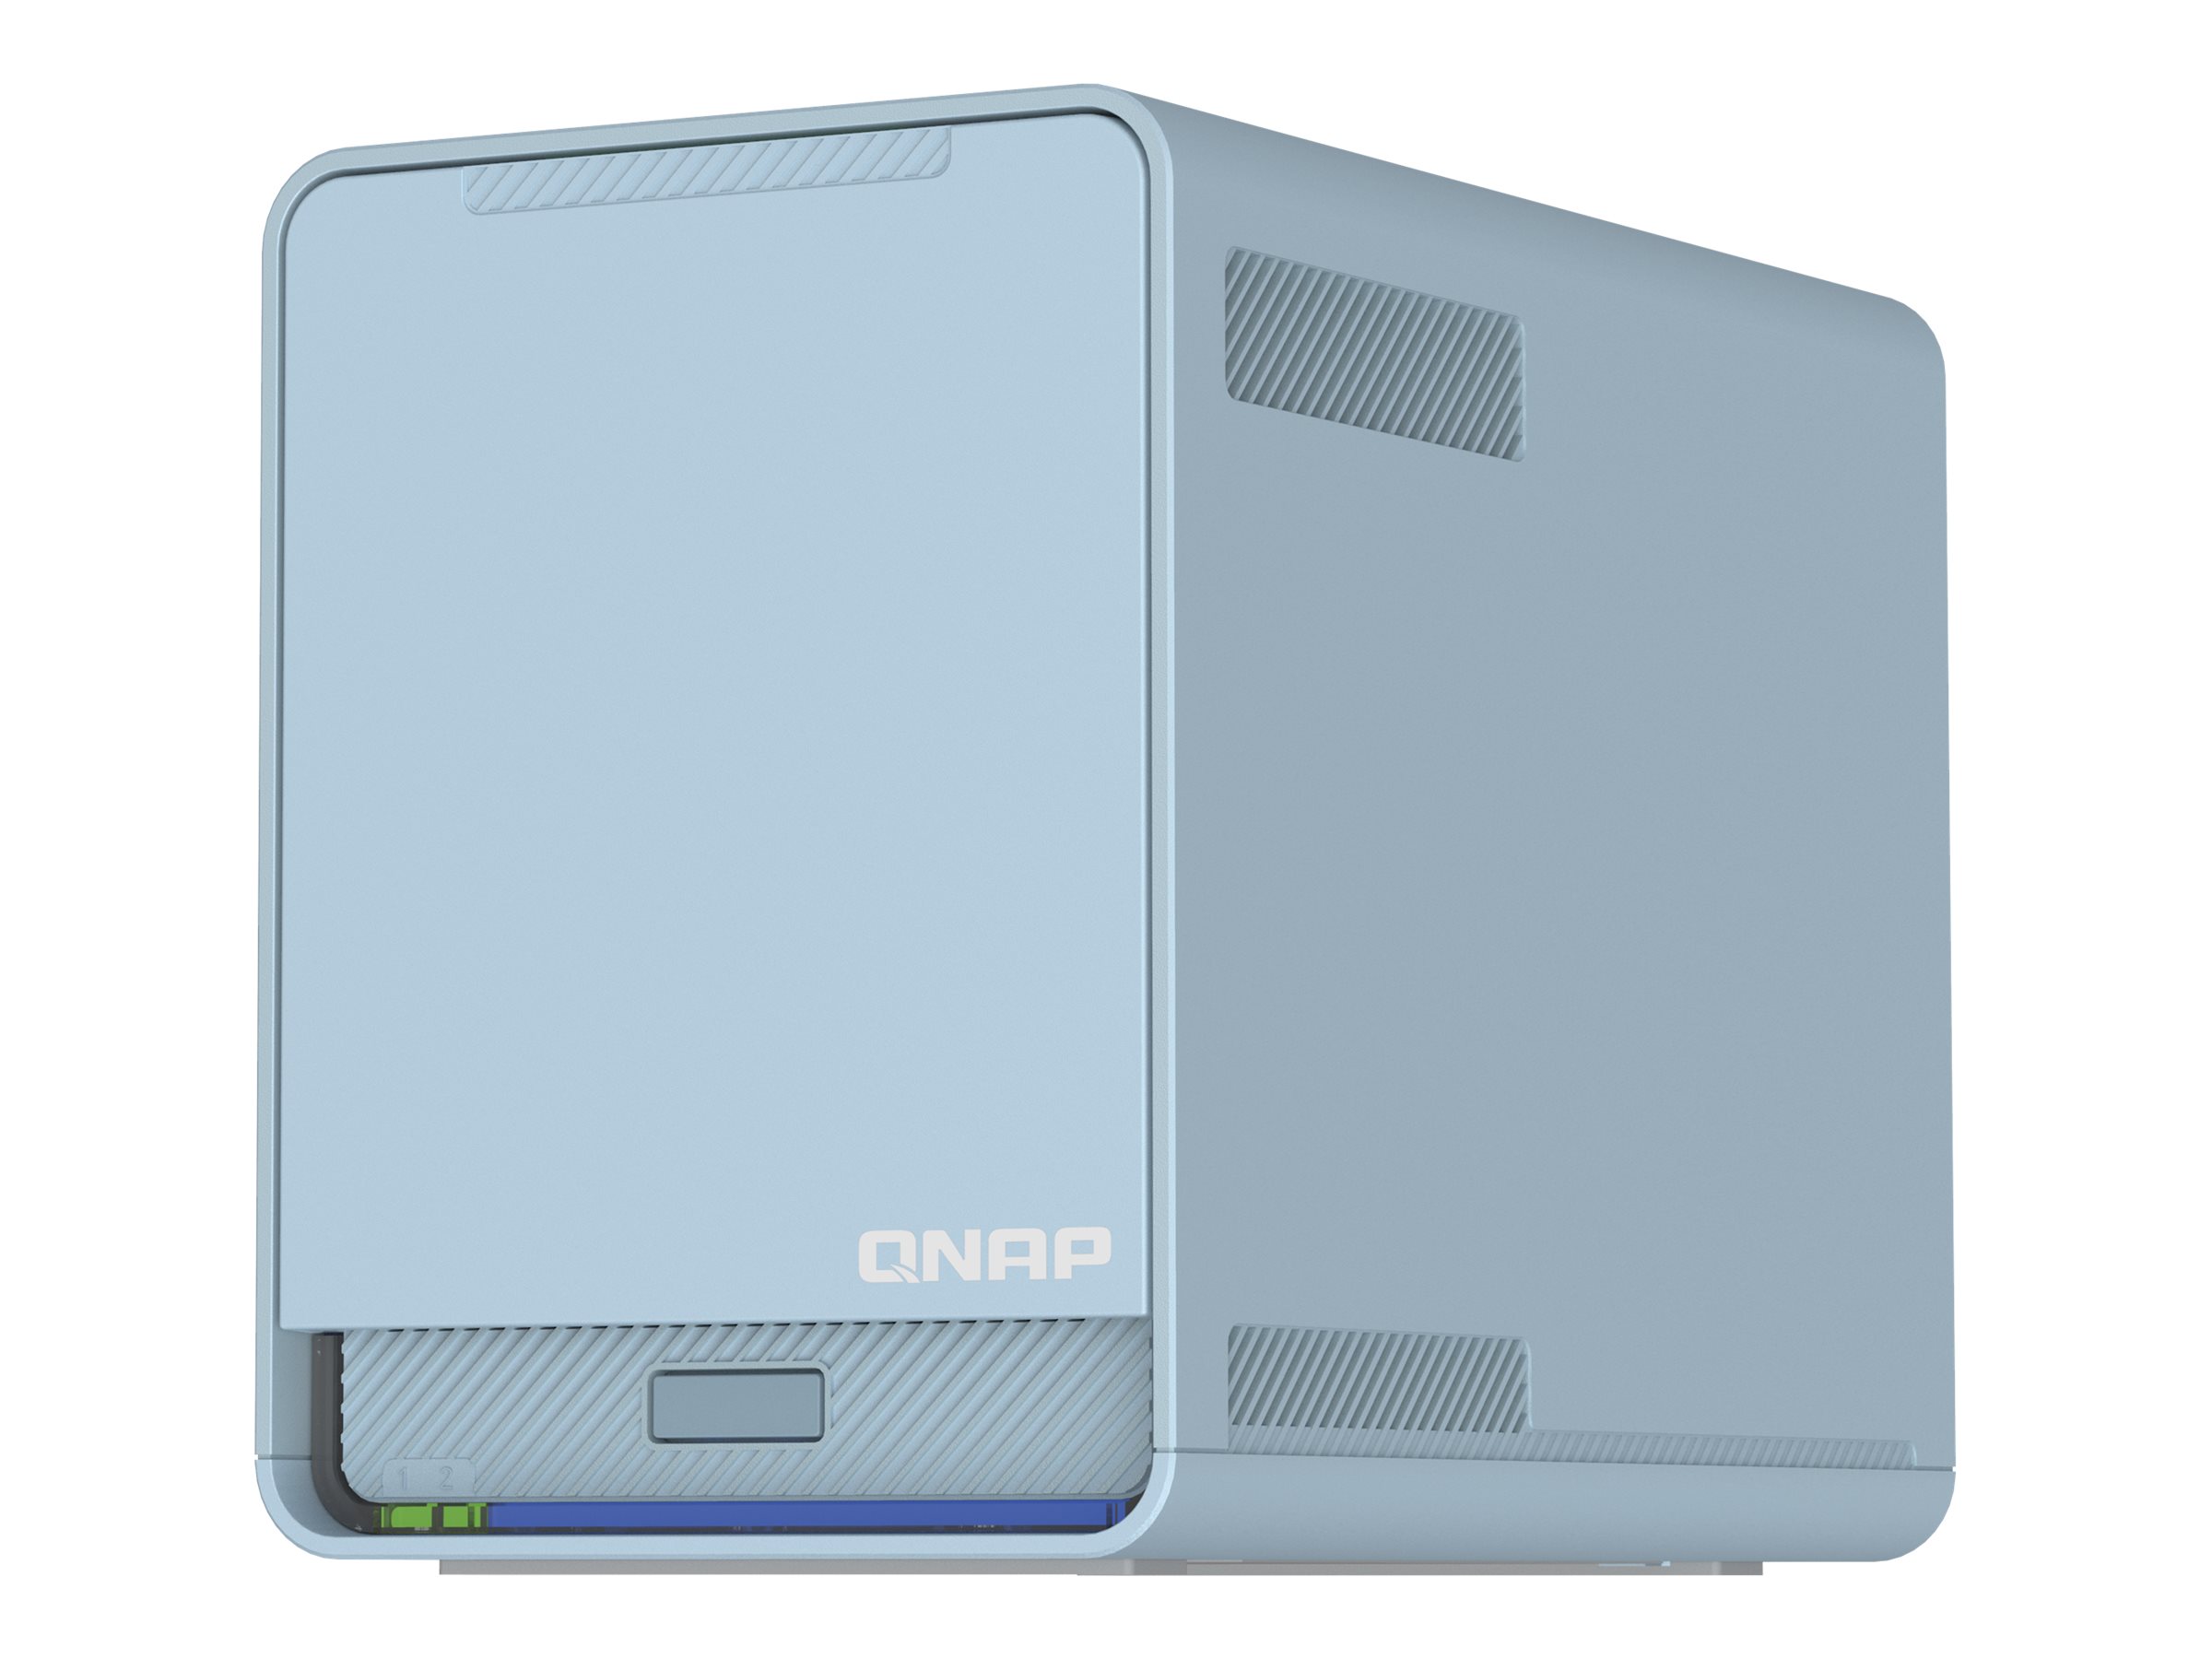 QNAP QMiroPlus-201W - Wireless Router - GigE, 2.5 GigE